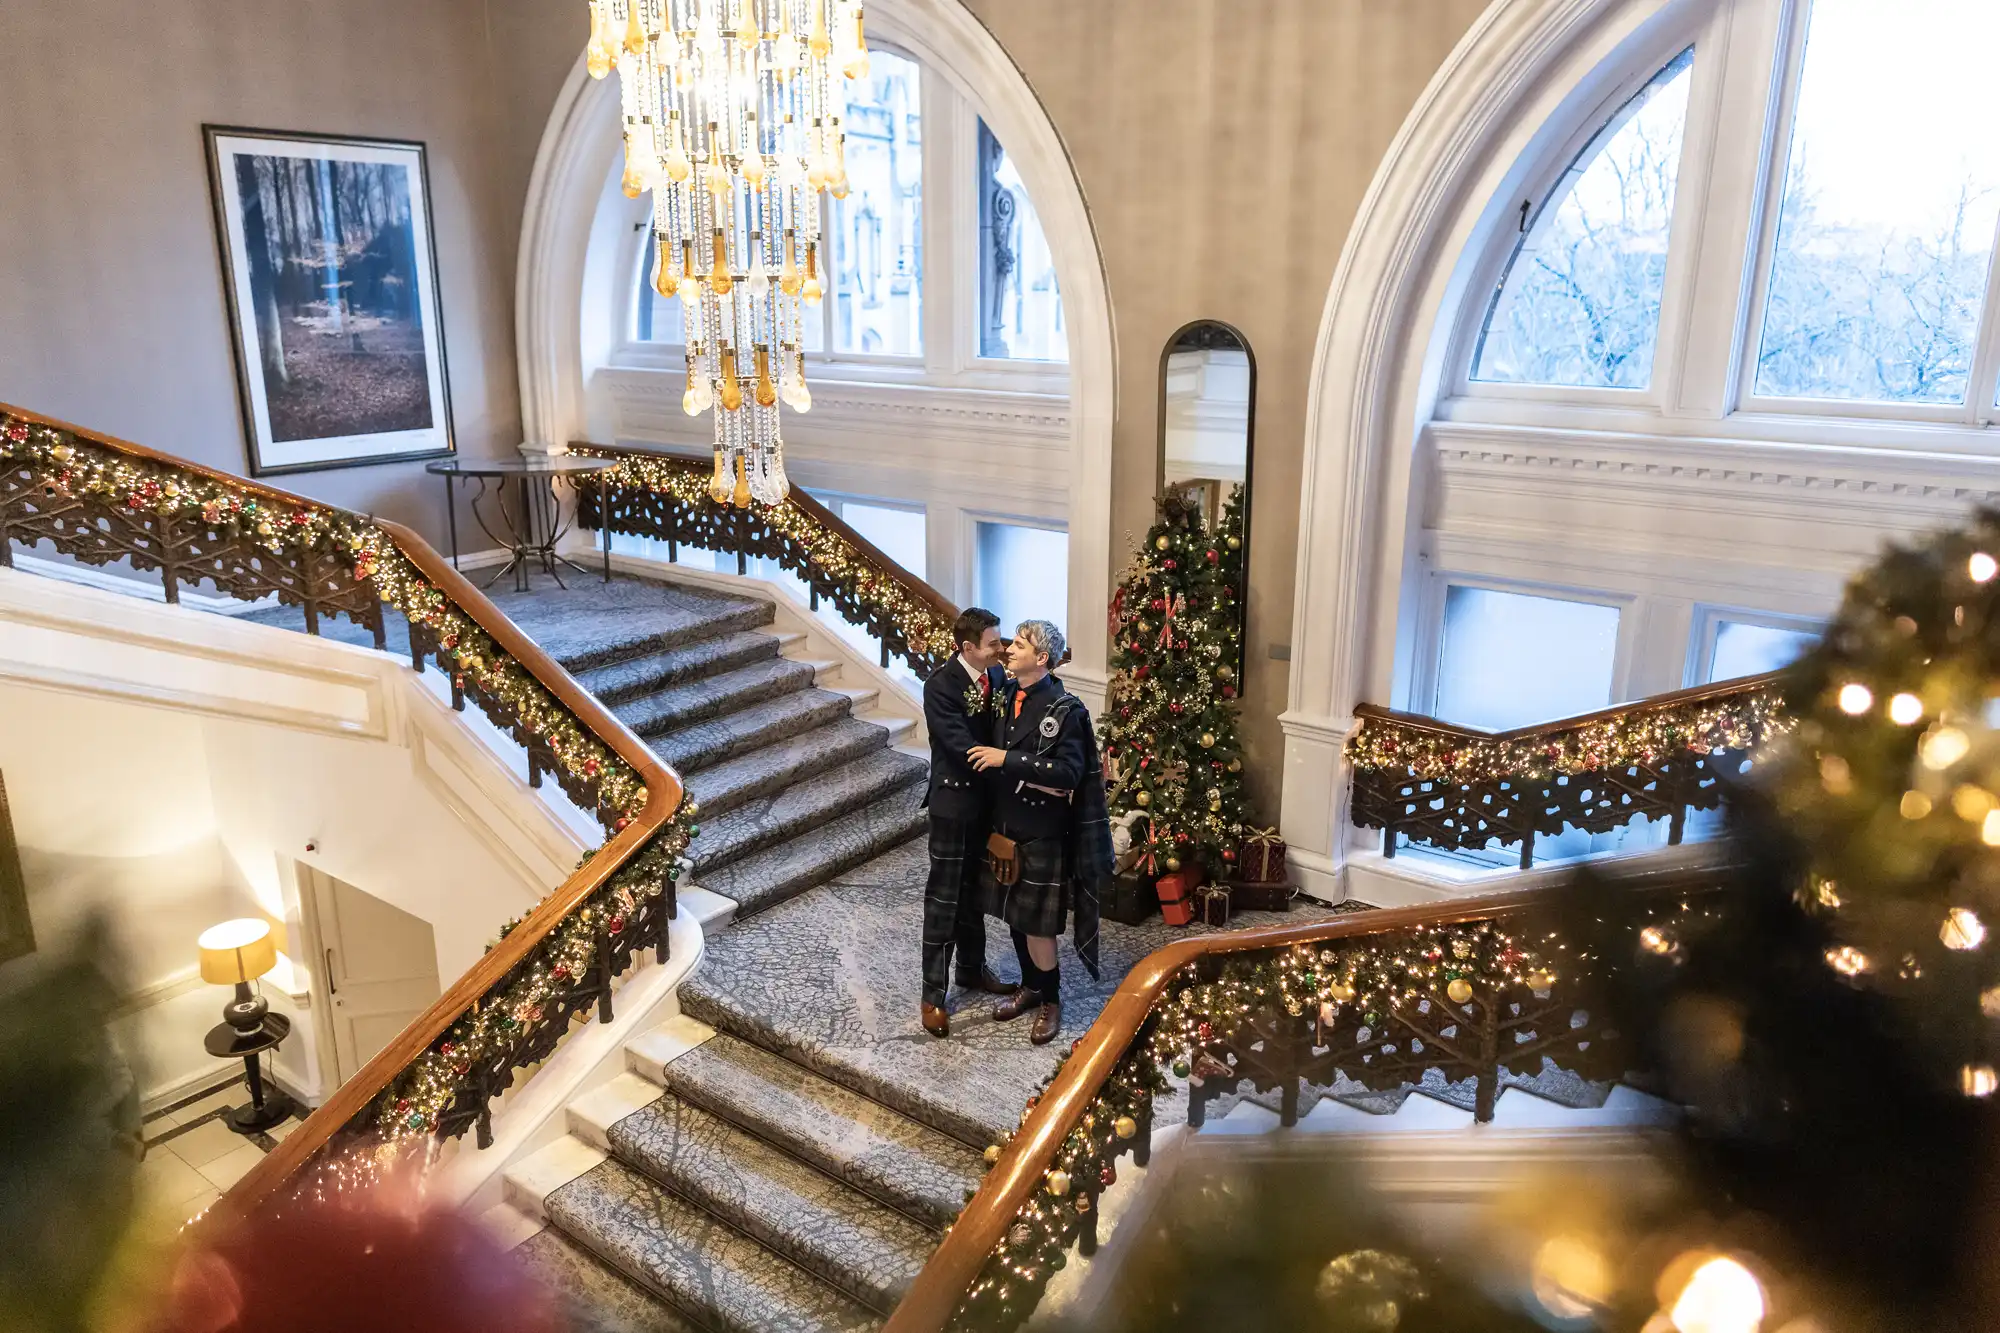 Two people in formal attire hold hands and smile at each other on a grand staircase decorated with holiday lights and garlands in an elegant building with arched windows and a large chandelier.